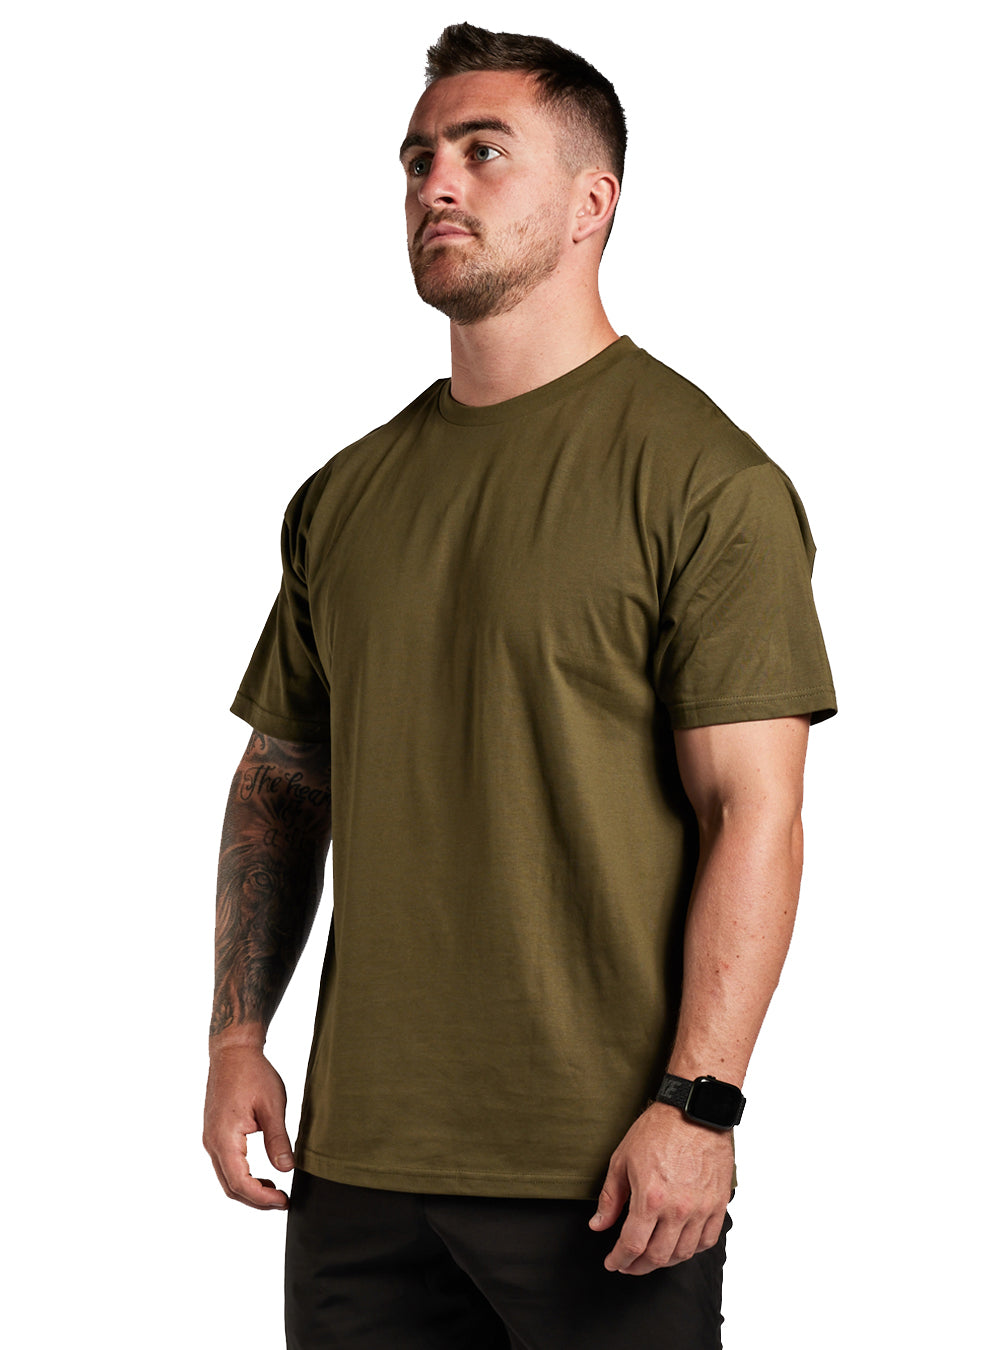 TacSource 100% Cotton Loose Fit Undergear Tee - 2